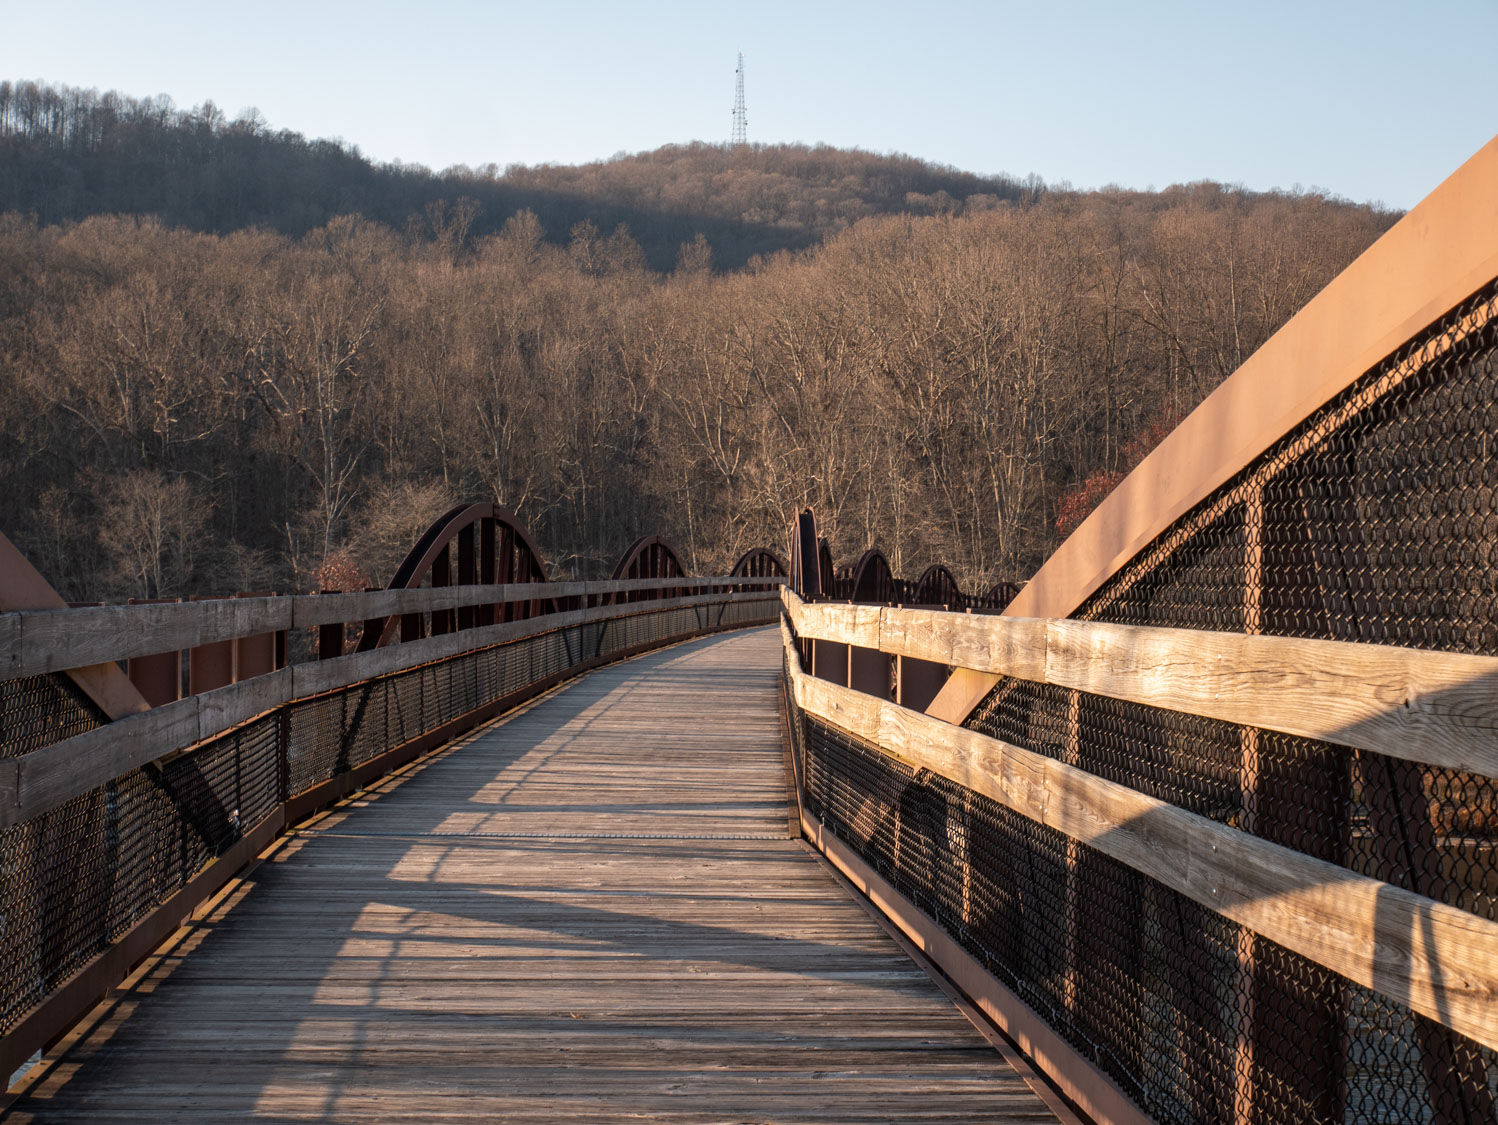 This old bridge is now part of the Alleghany Gap bike trail, and provides nice bike/pedestrian access to the Ferncliff peninsula